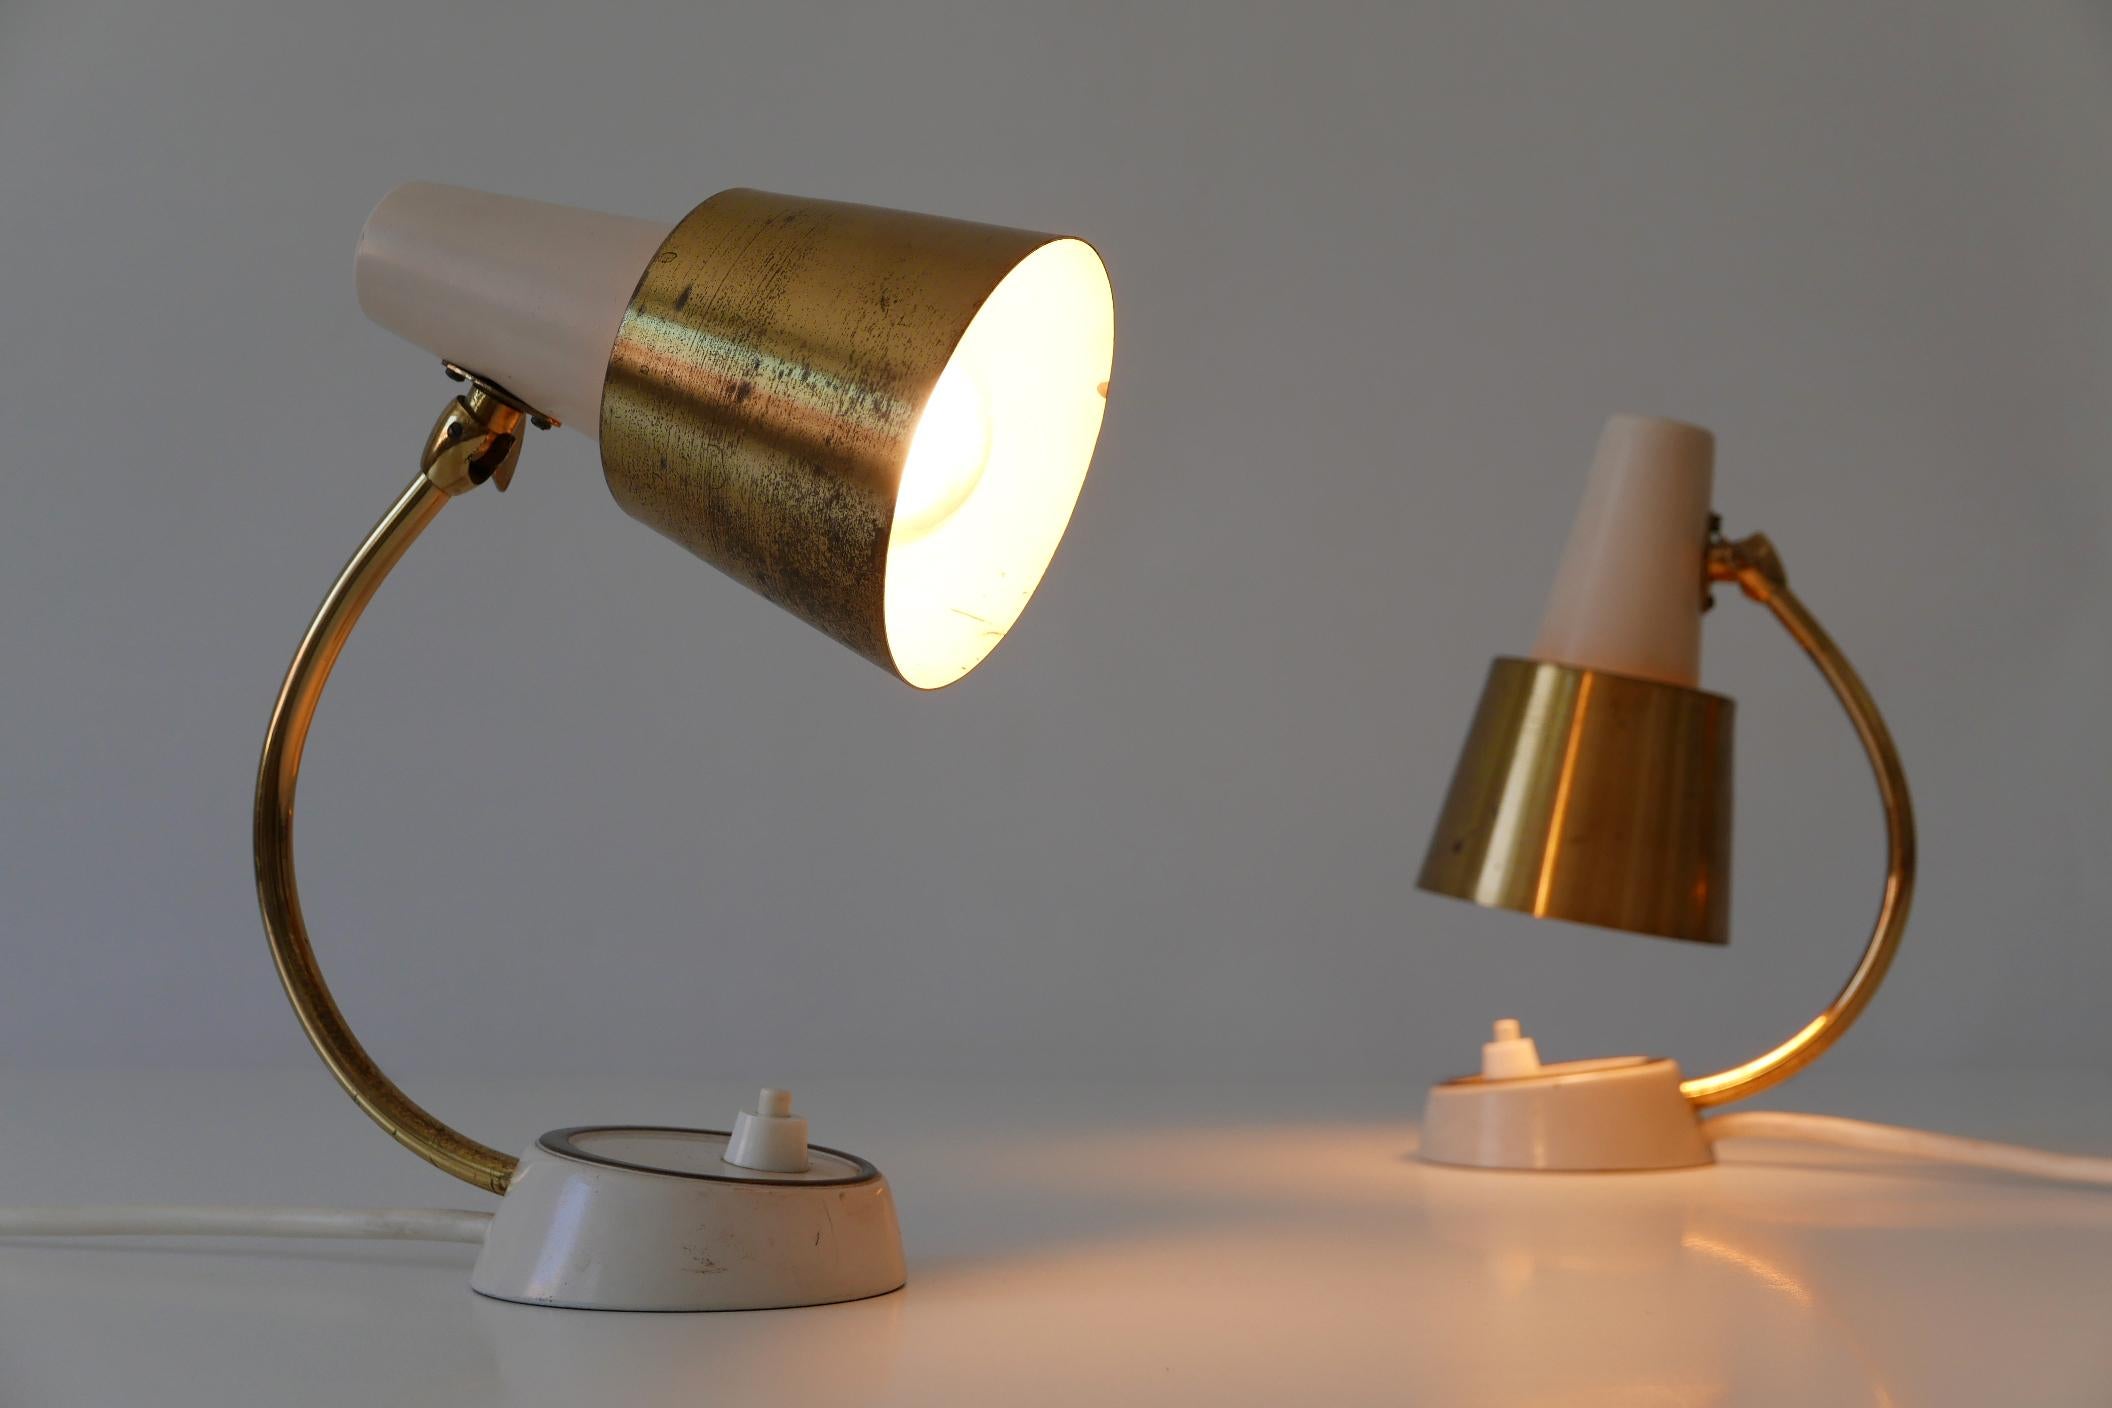 Set of Two Mid-Century Modern Bedside Table Lamps or Wall Lights, 1950s, Germany For Sale 8